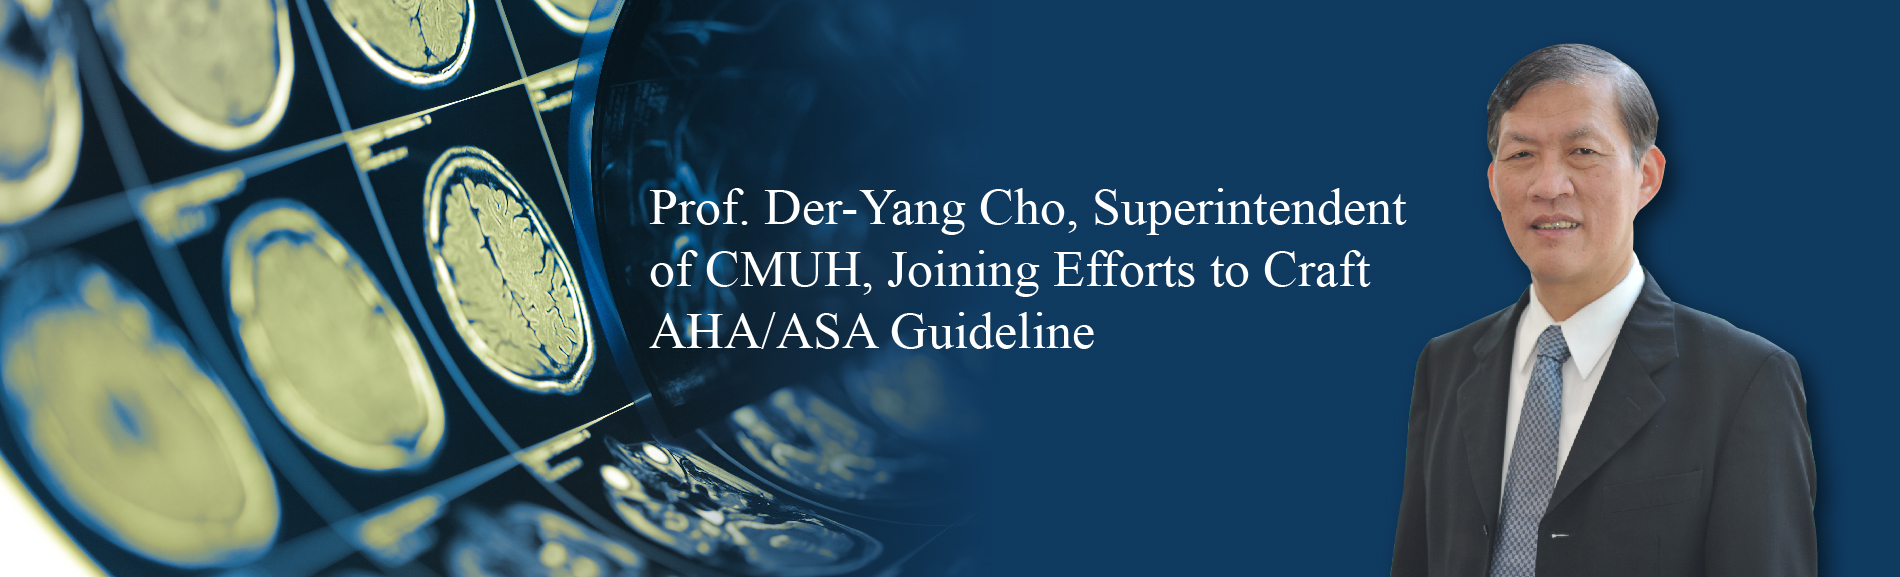 Prof. Der-Yang Cho, Superintendent of CMUH, Joining Efforts to Craft AHA/ASA Guideline